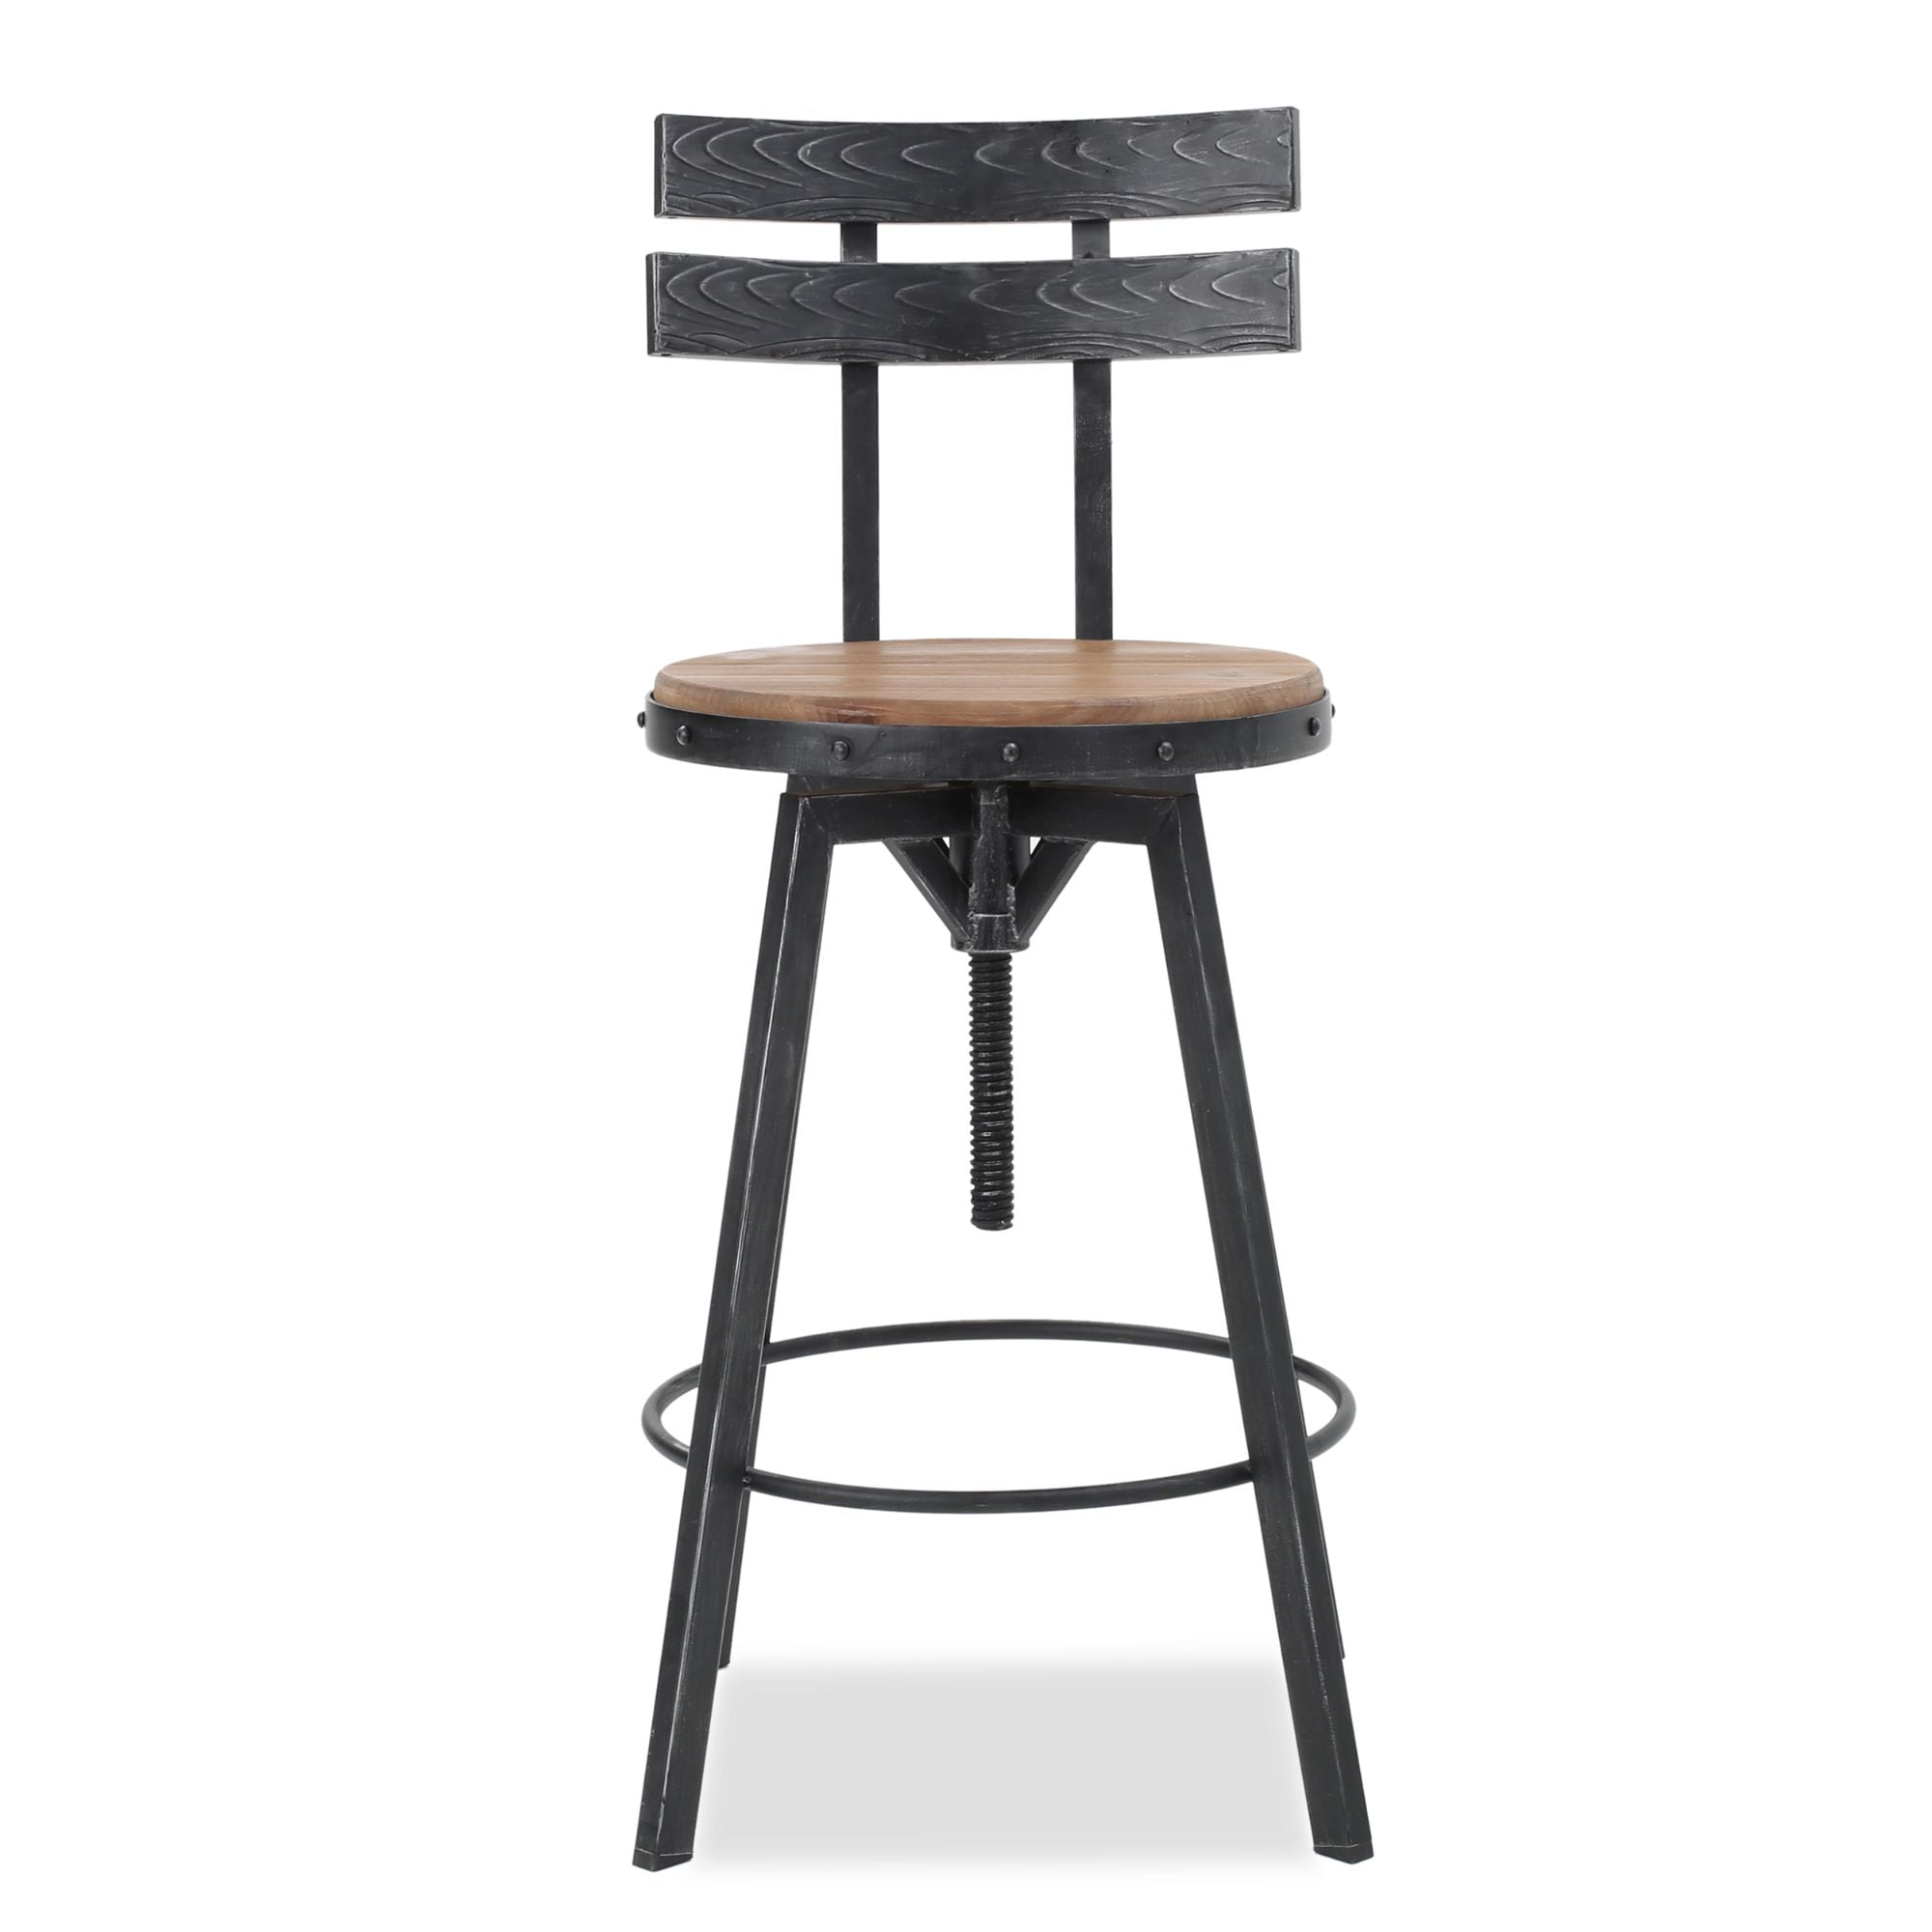 Christopher Knight Home Alanis Firwood, Christopher Knight Home Bar Stools